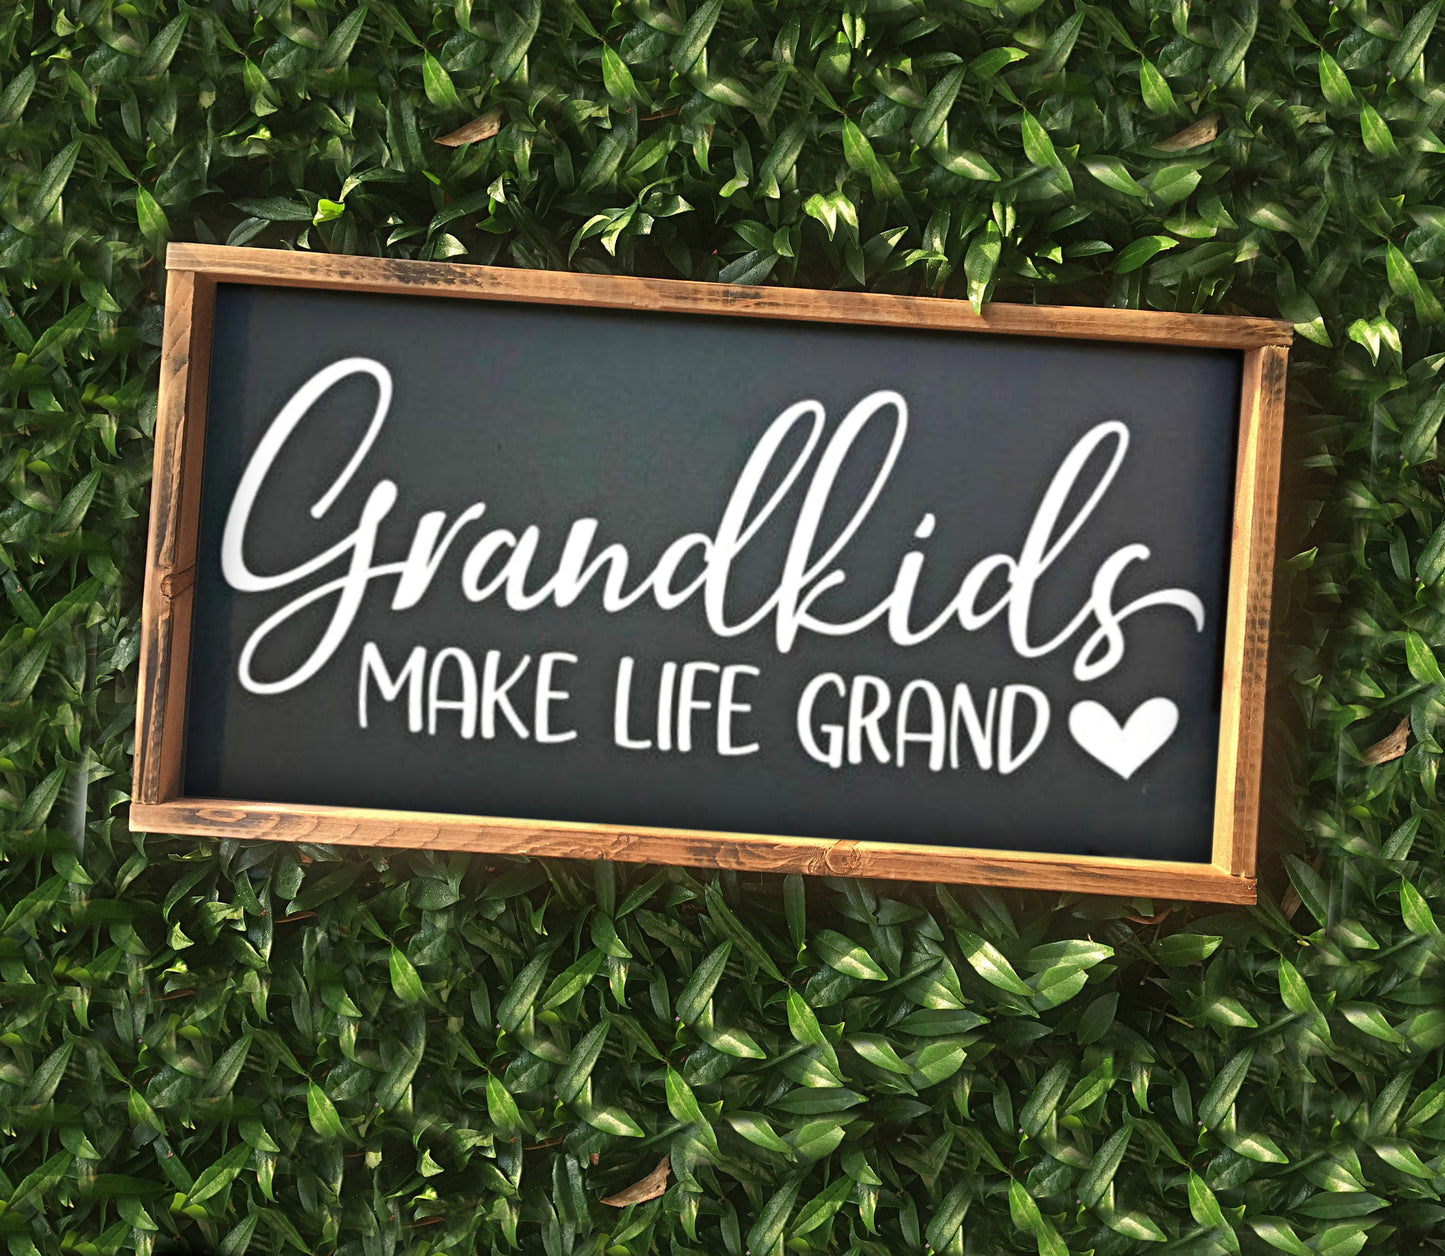 Grandkids make life grand sign - gift for her - wood signs - grandparents sign - Mother's Day gift - Father's Day gift -